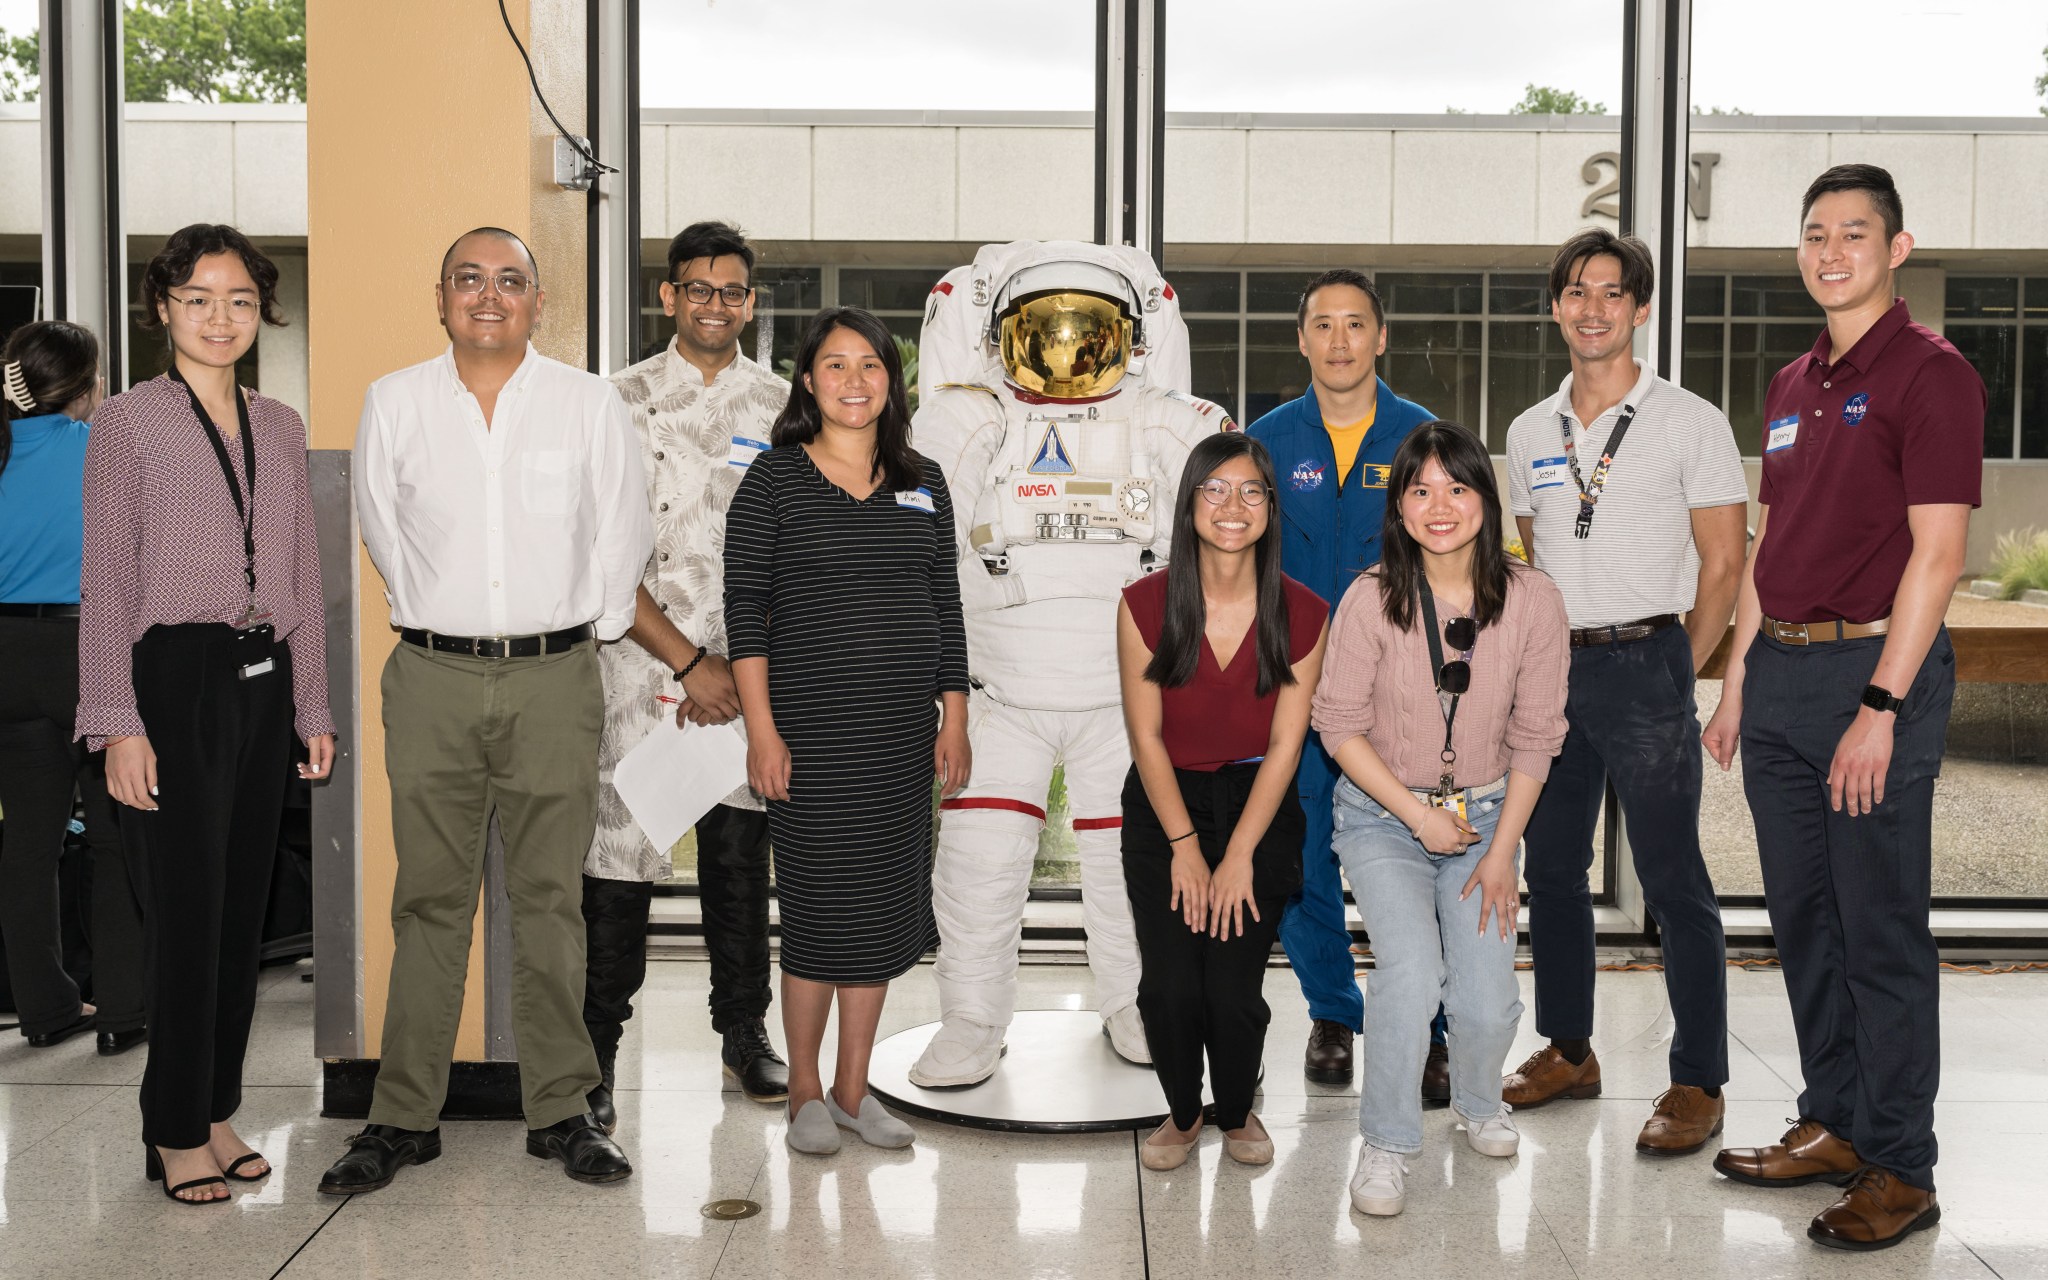 A group of eight male and female Asian American individuals pose for a photograph with NASA astronaut Jonny Kim and a spacesuit.